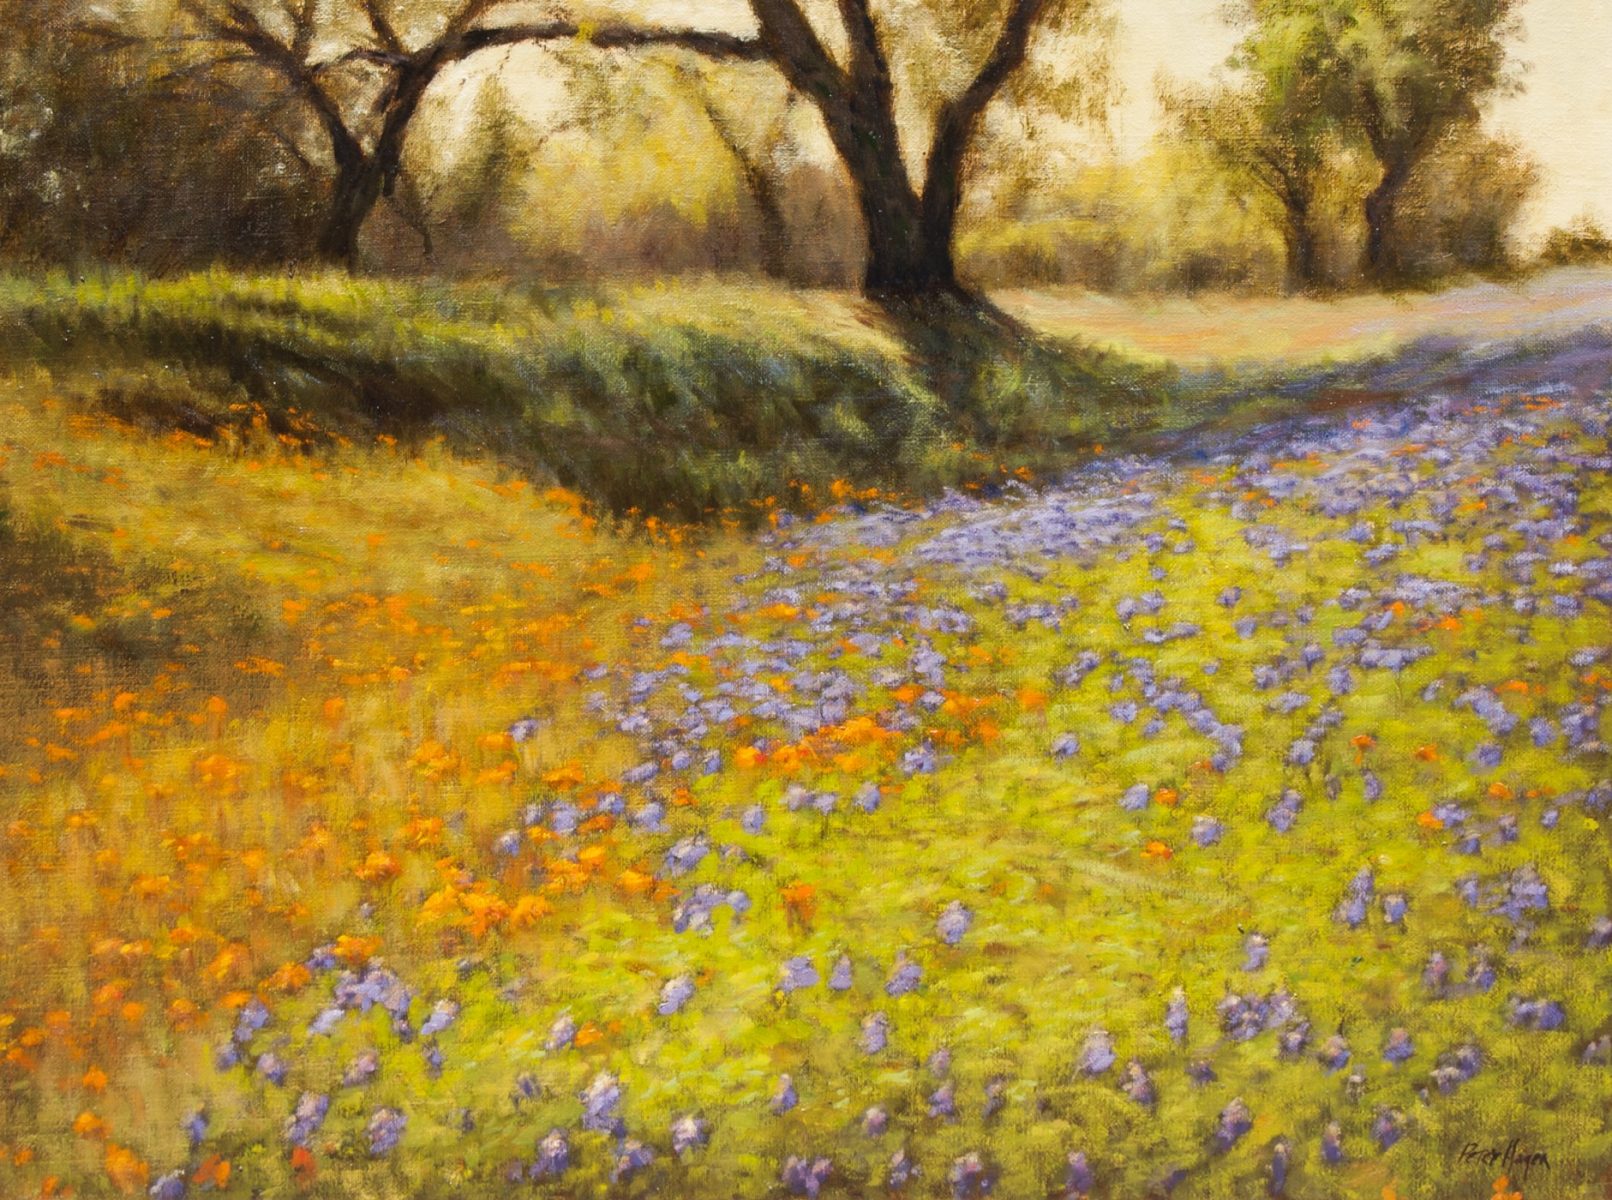 Painting of the Texas Hill Country by Peter Hagen